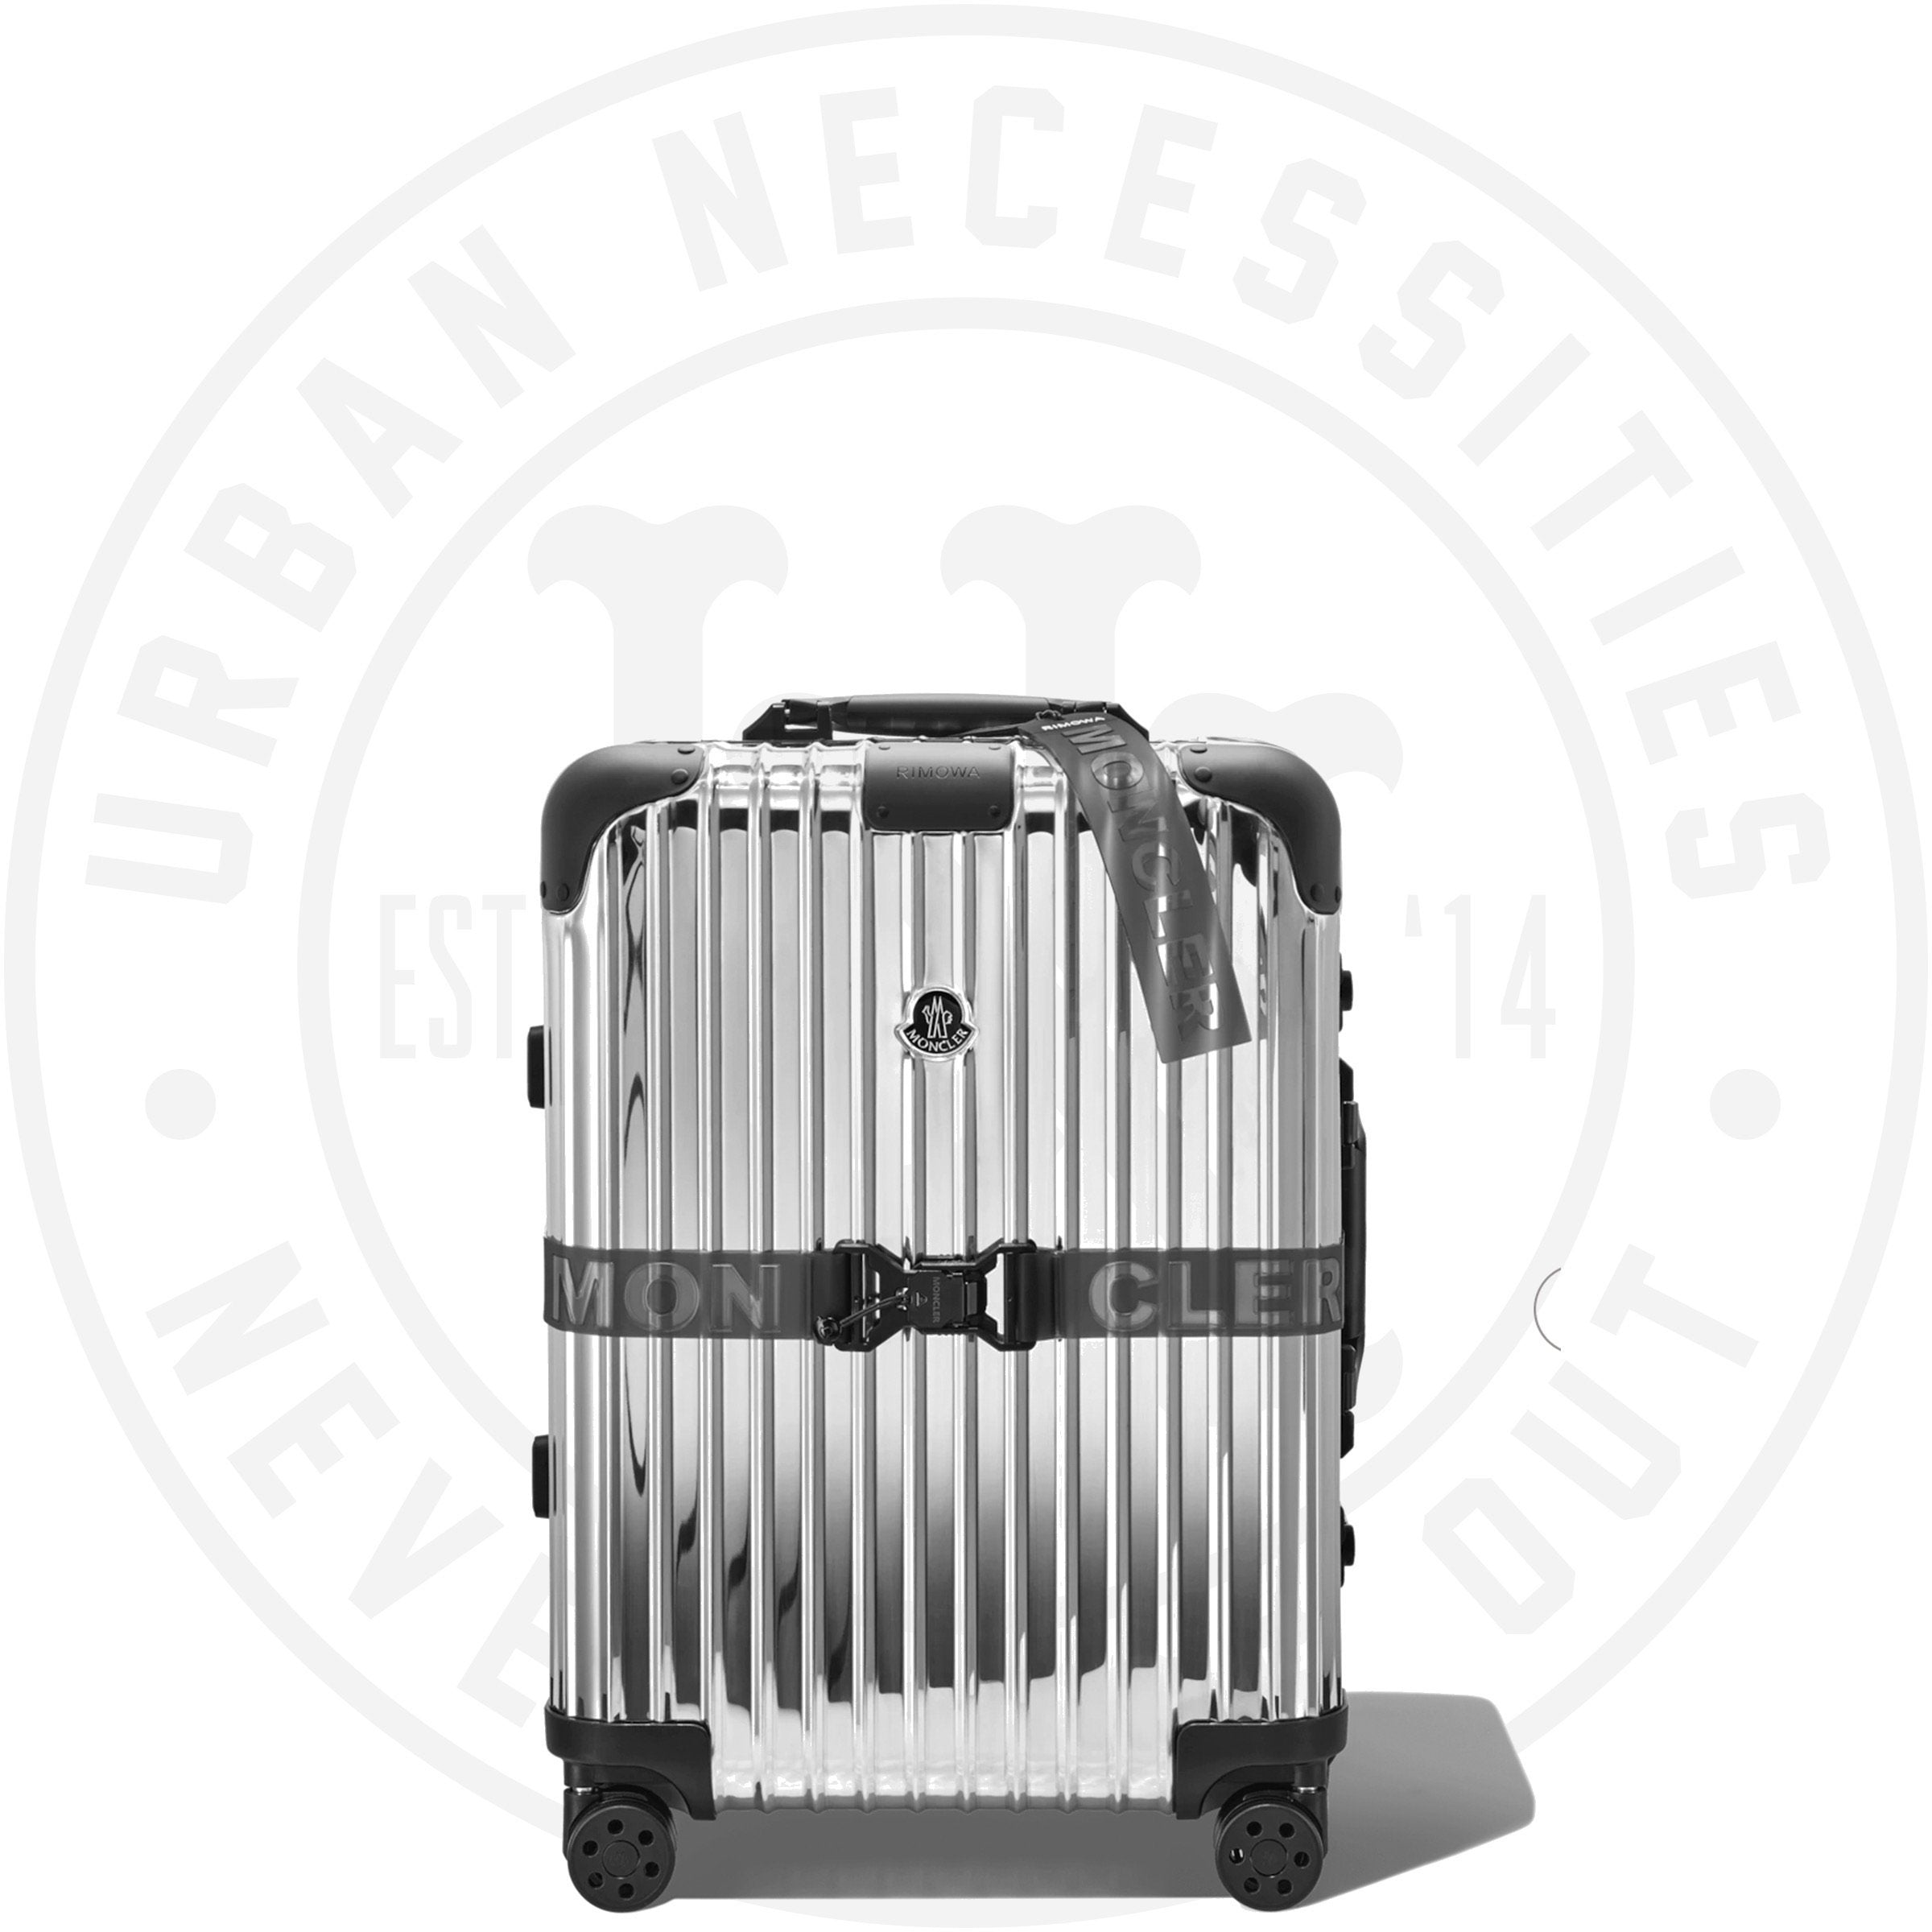 Supreme x Rimowa Is the Easiest Way to Never Lose Your Luggage